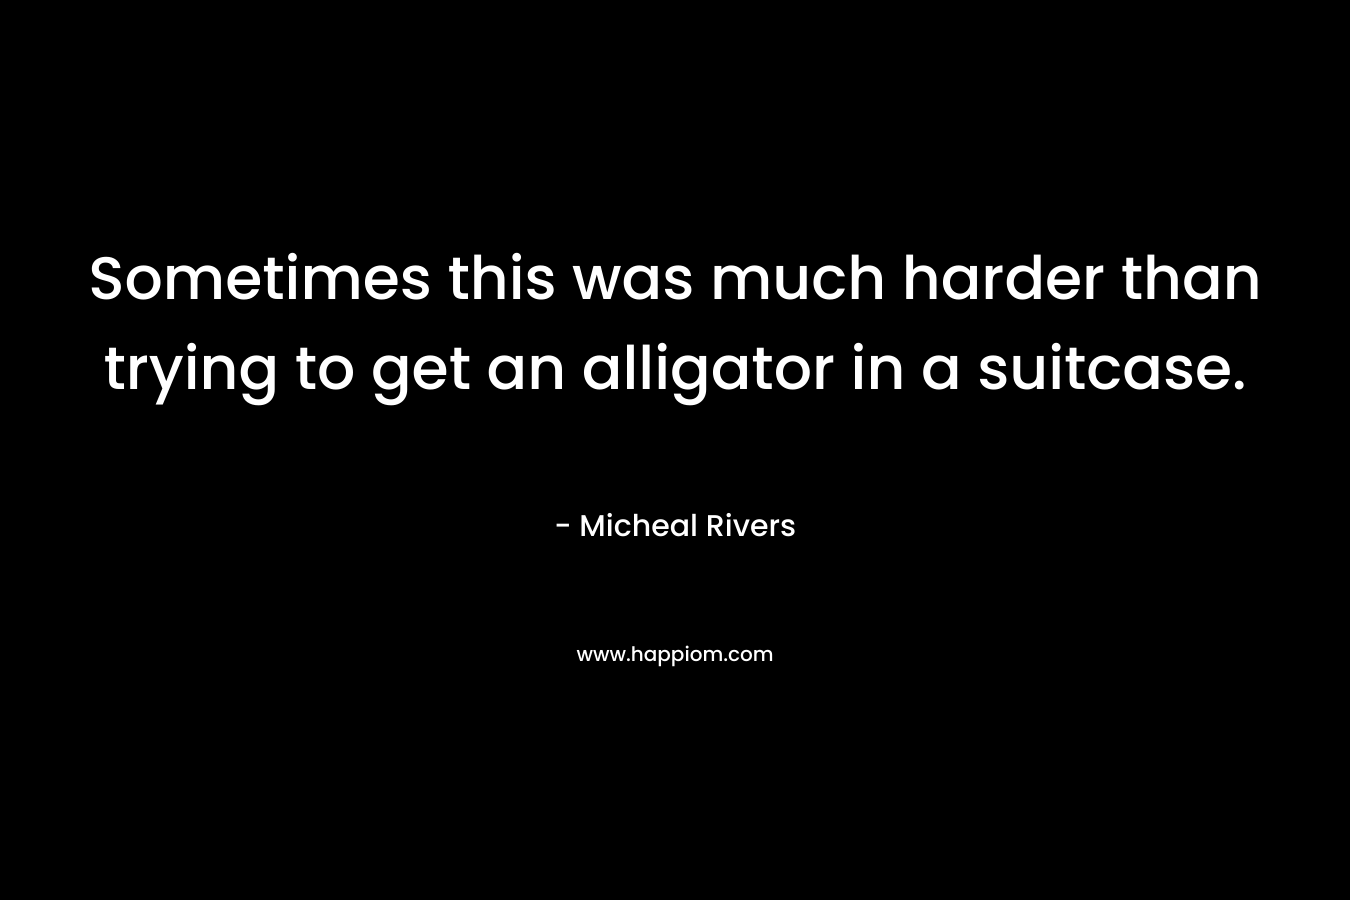 Sometimes this was much harder than trying to get an alligator in a suitcase. – Micheal Rivers